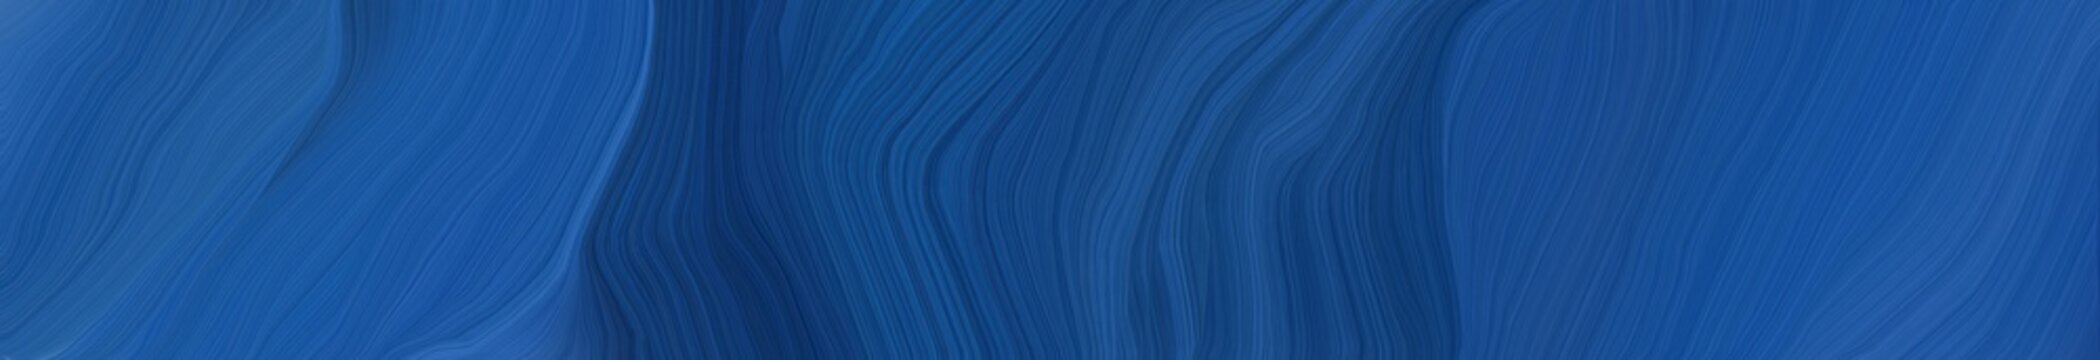 dynamic wide colored banner. modern waves background design with strong blue, teal blue and midnight blue color © Eigens